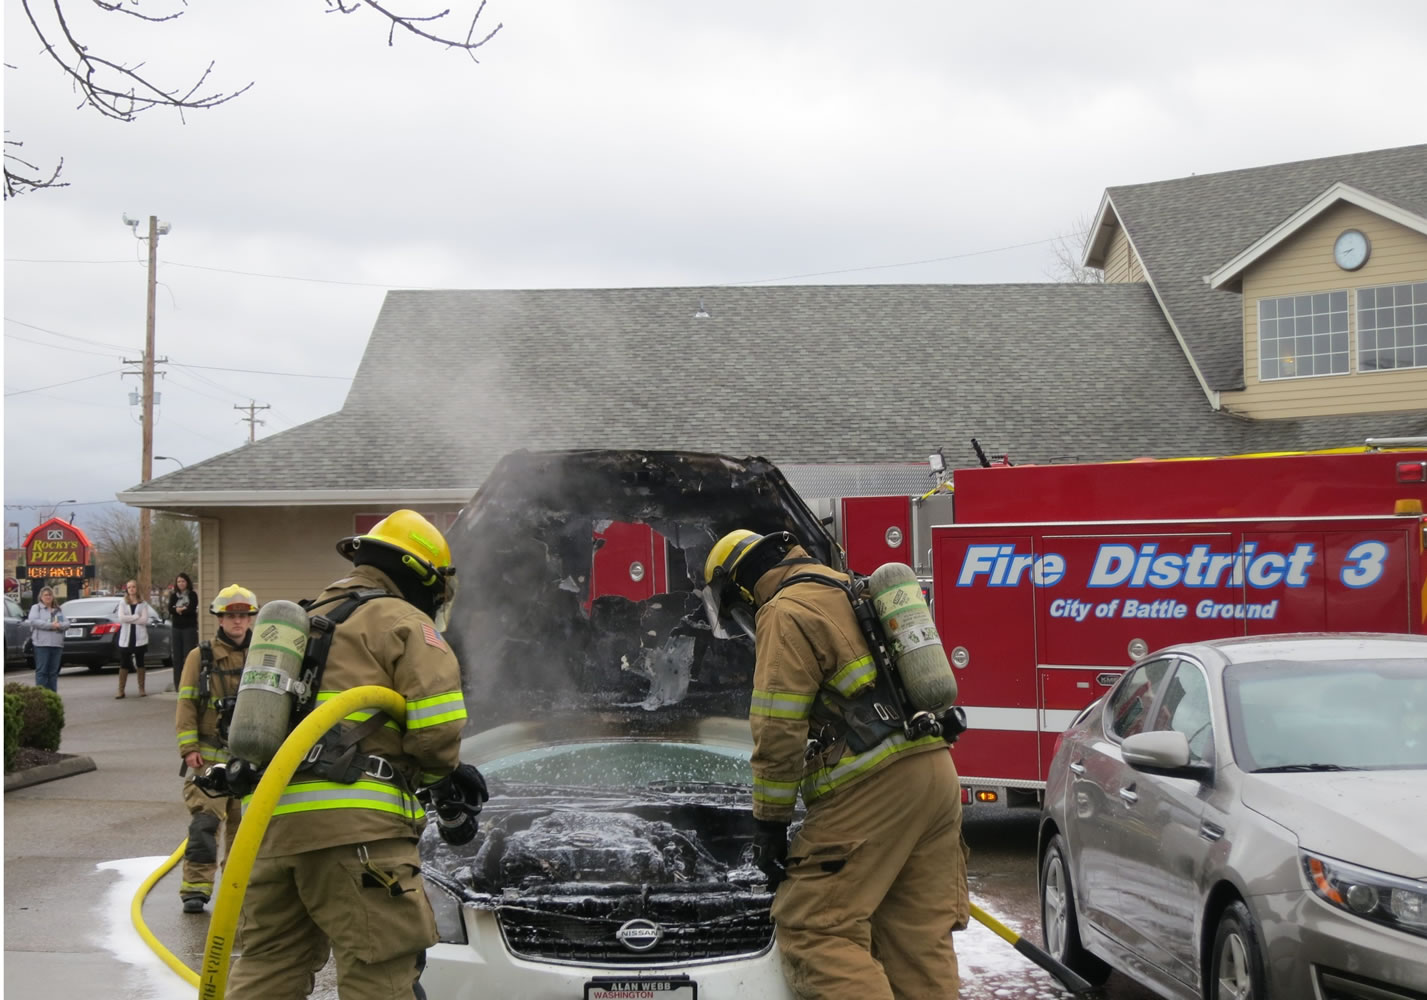 Firefighters douse a car fire at 15 S..W 20th Ave. in Battle Ground Monday morning.